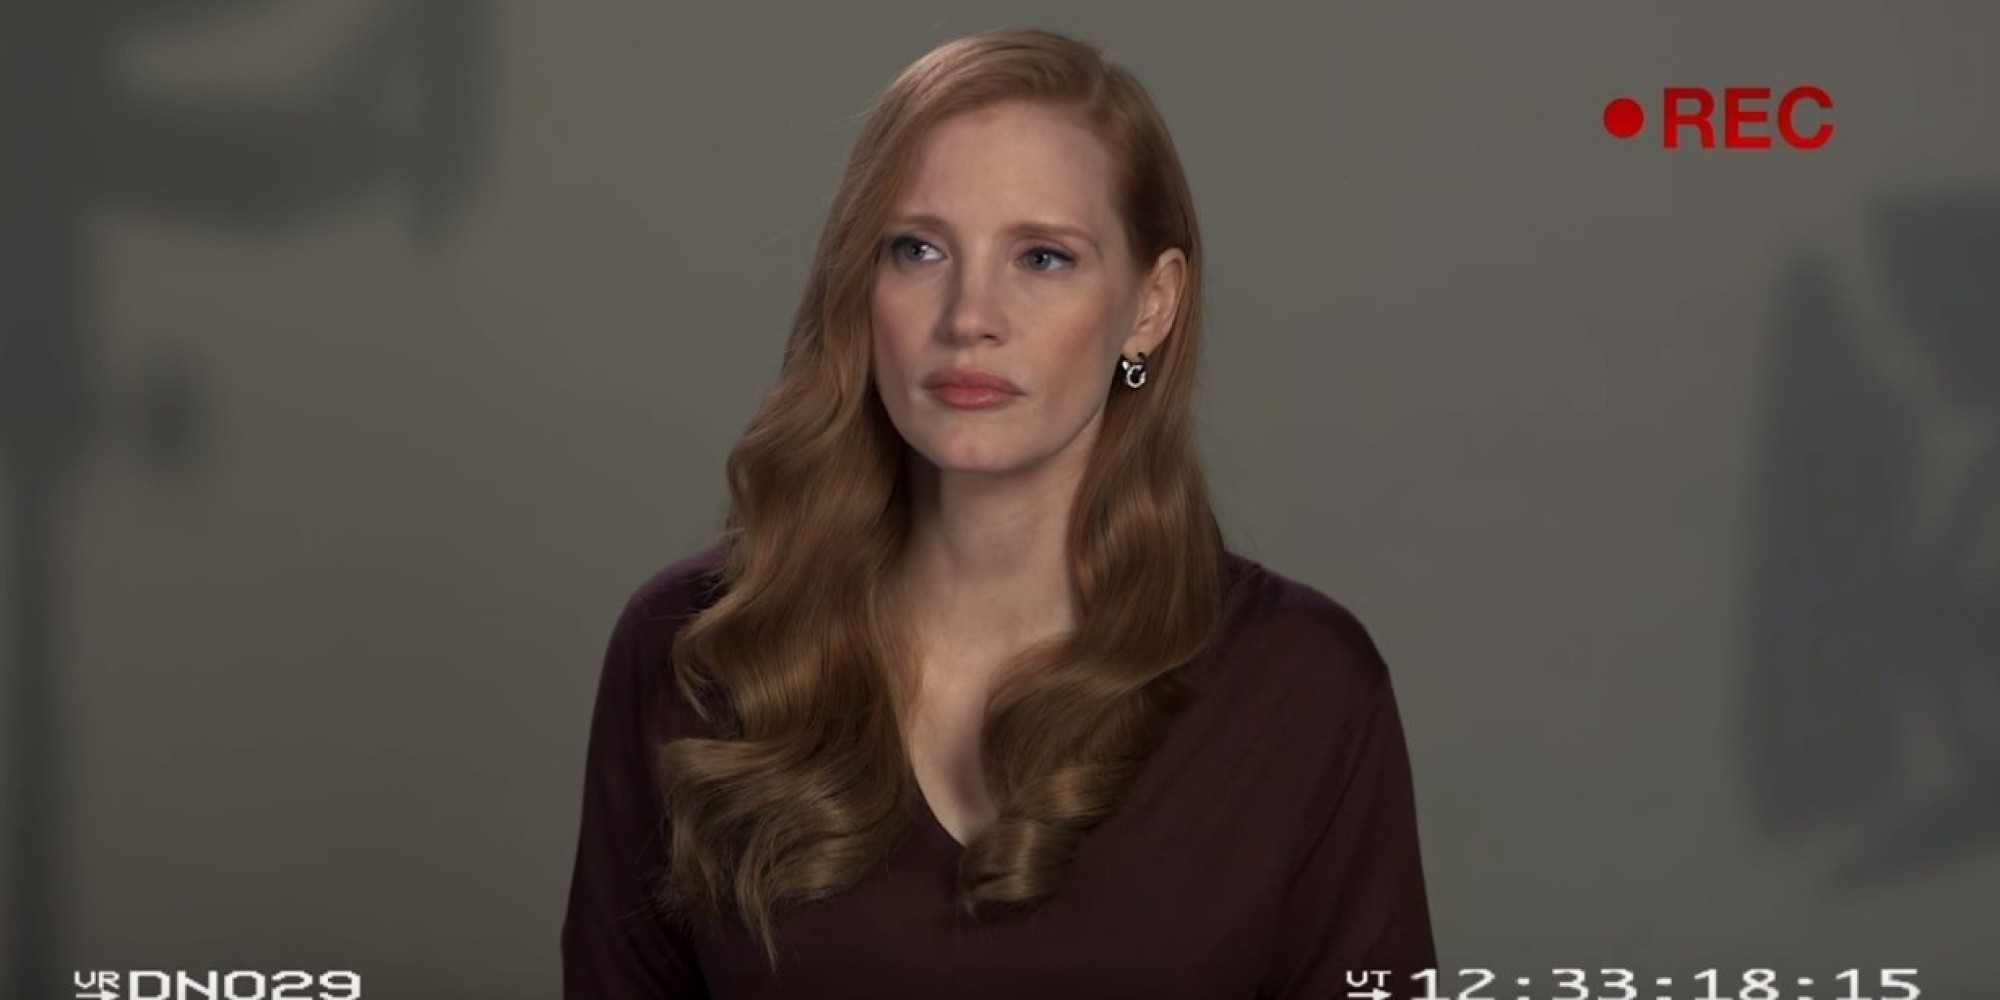 o THE TONIGHT SHOW facebook entertainment, HOLLYWOOD, Jessica Chastain, Jimmy Fallon, life, The Tonight Show, Woman, casting, audition, sexism